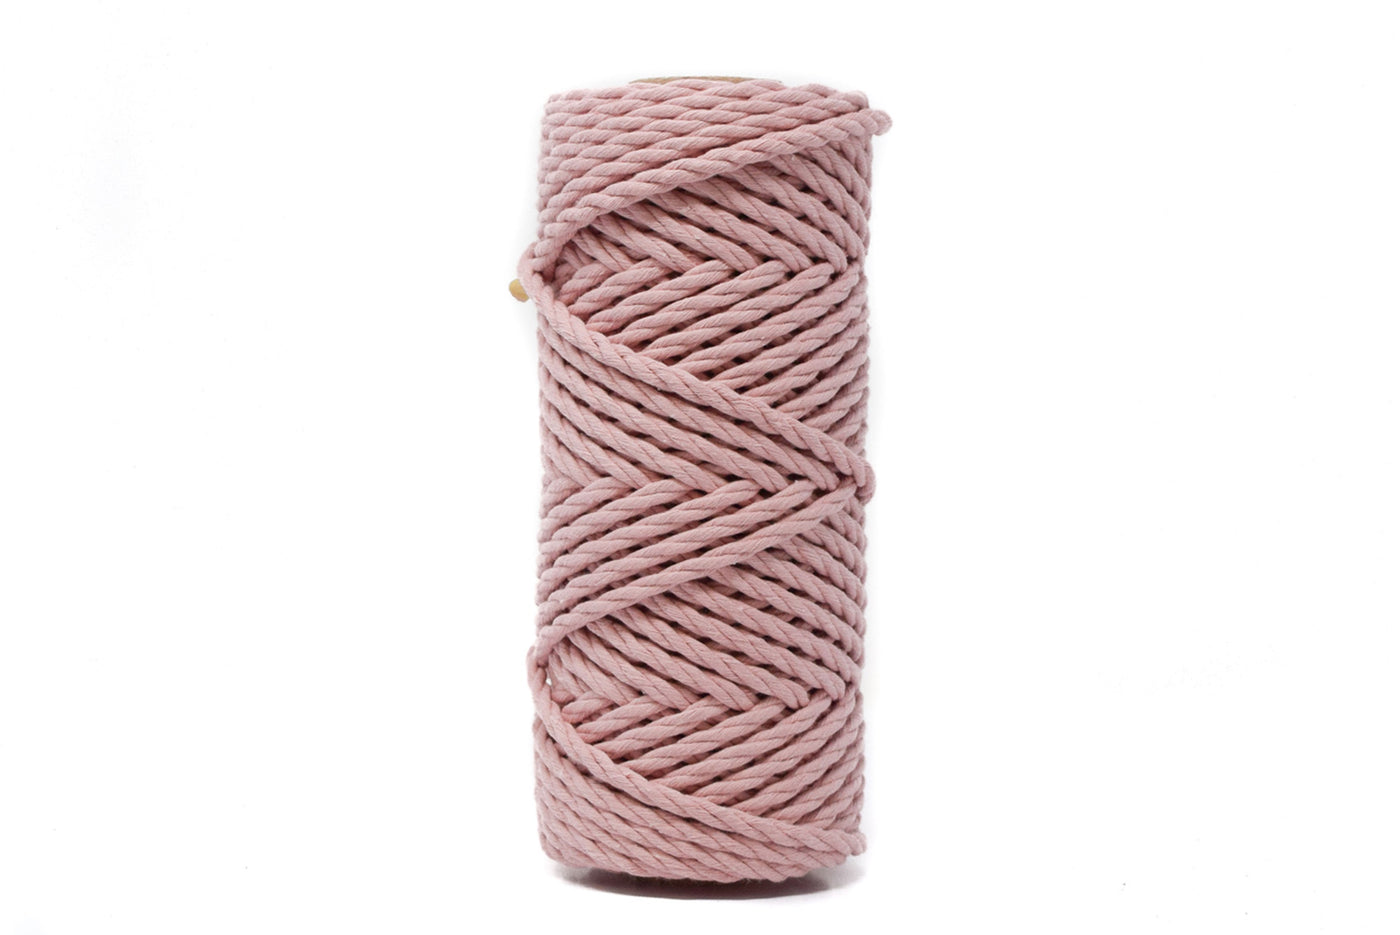 COTTON ROPE ZERO WASTE 5 MM - 3 PLY - BALLET PINK COLOR